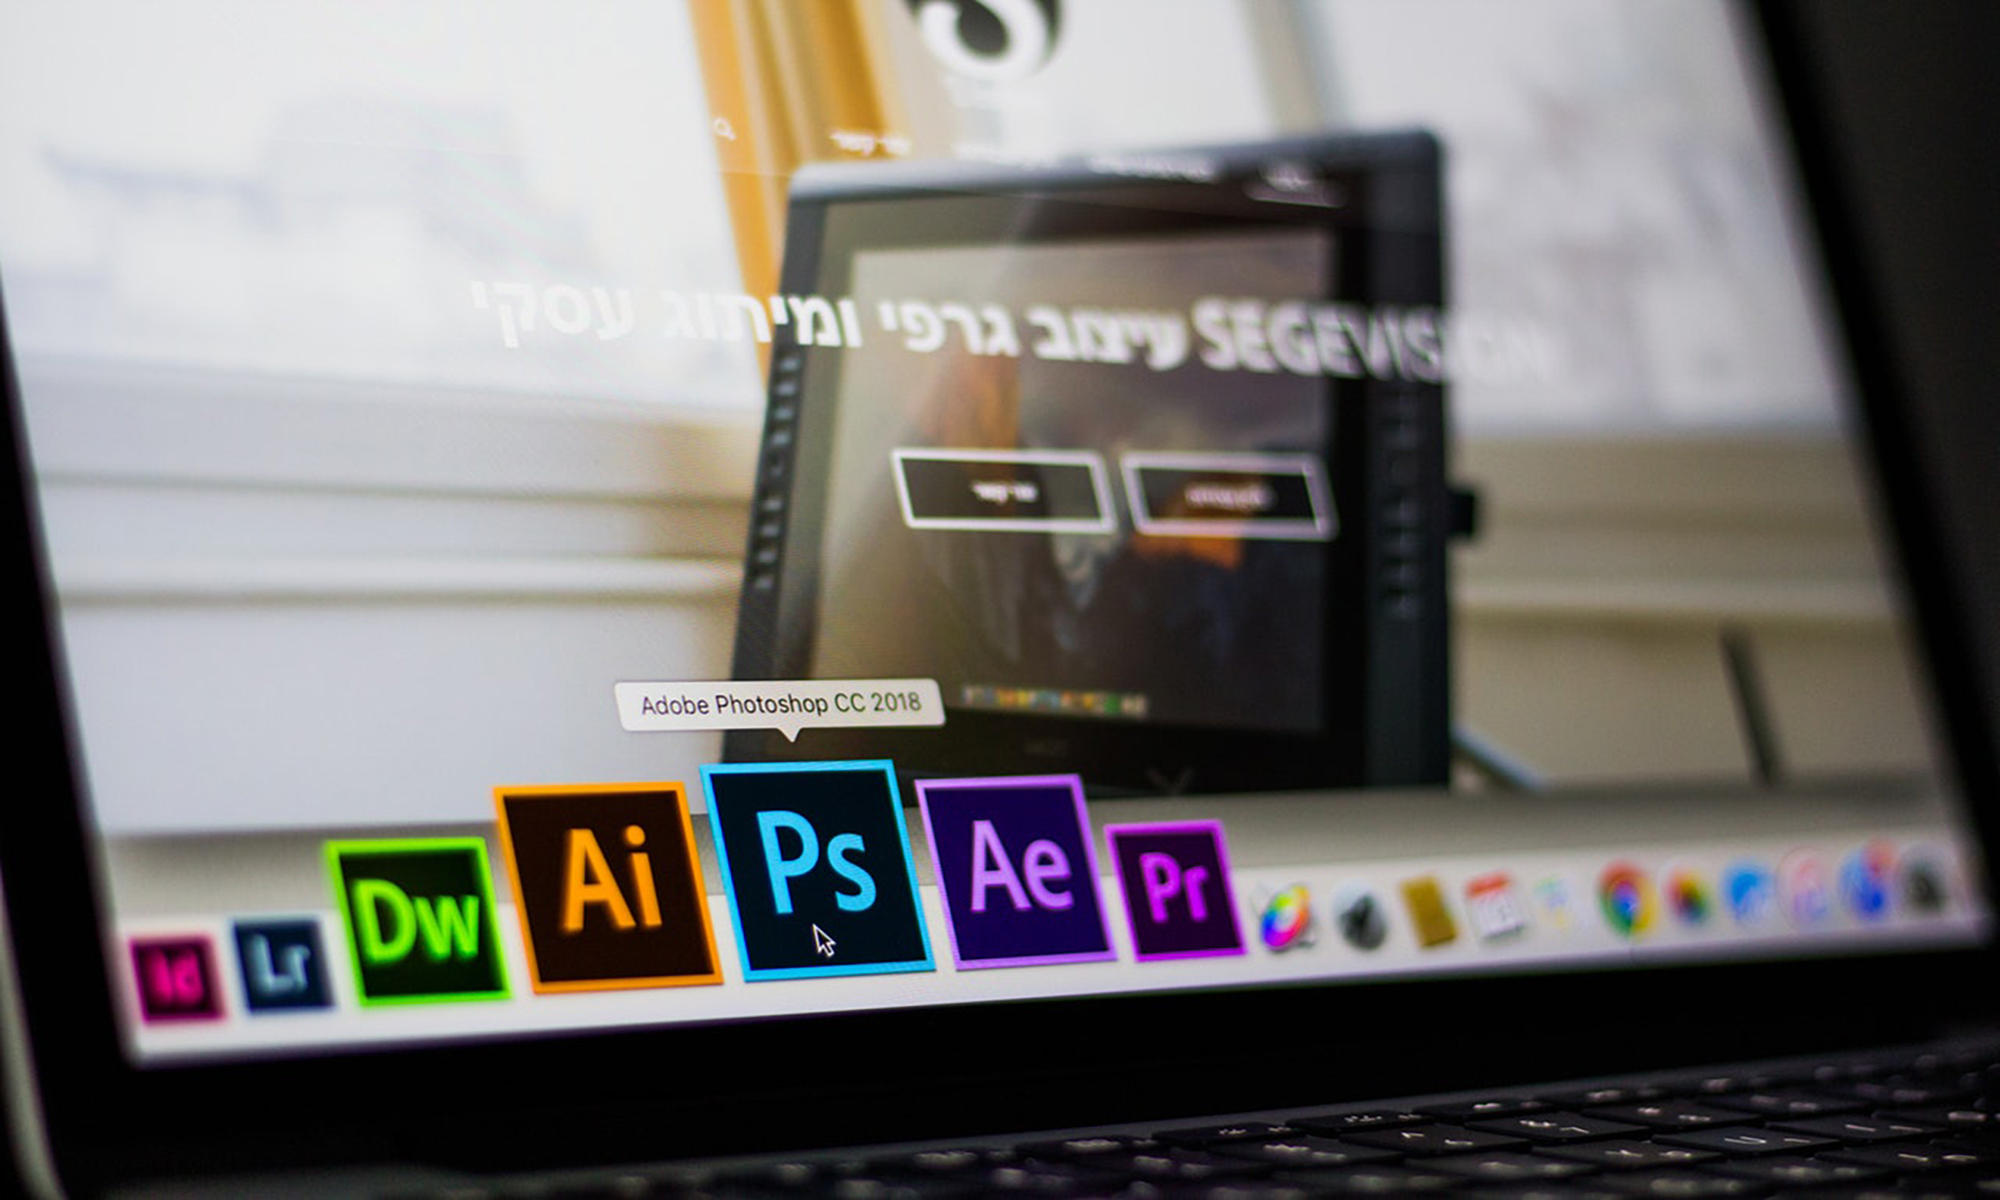 Adobe Products That Can Help a Digital Marketer